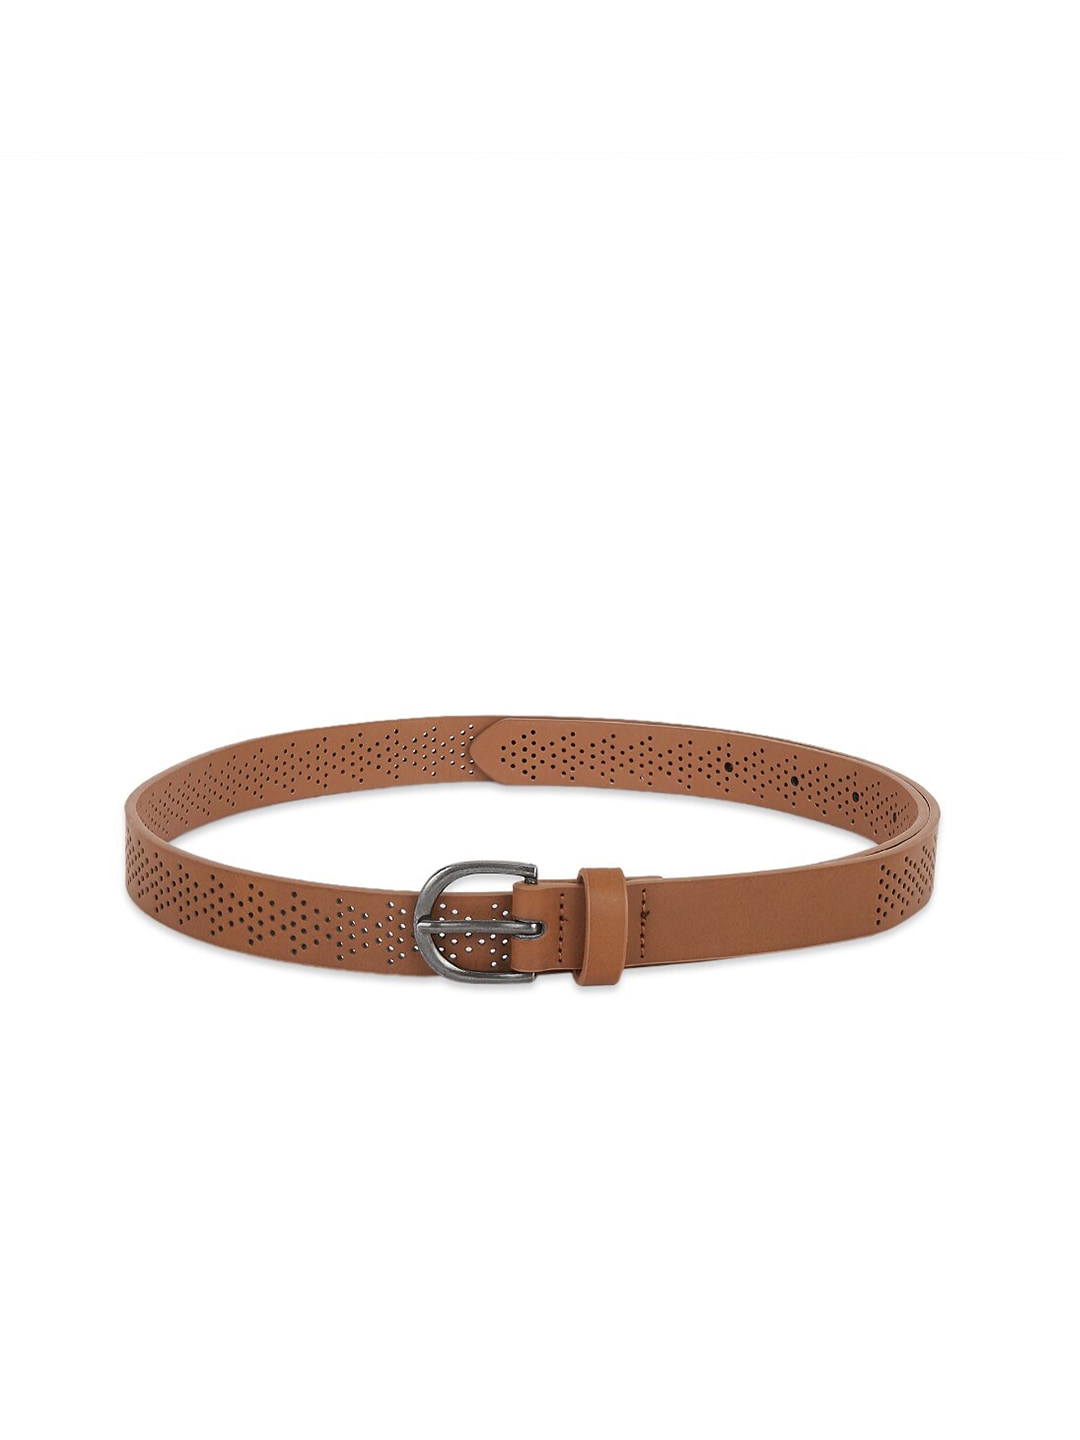 Forever Glam by Pantaloons Women Tan Textured PU Belt Price in India